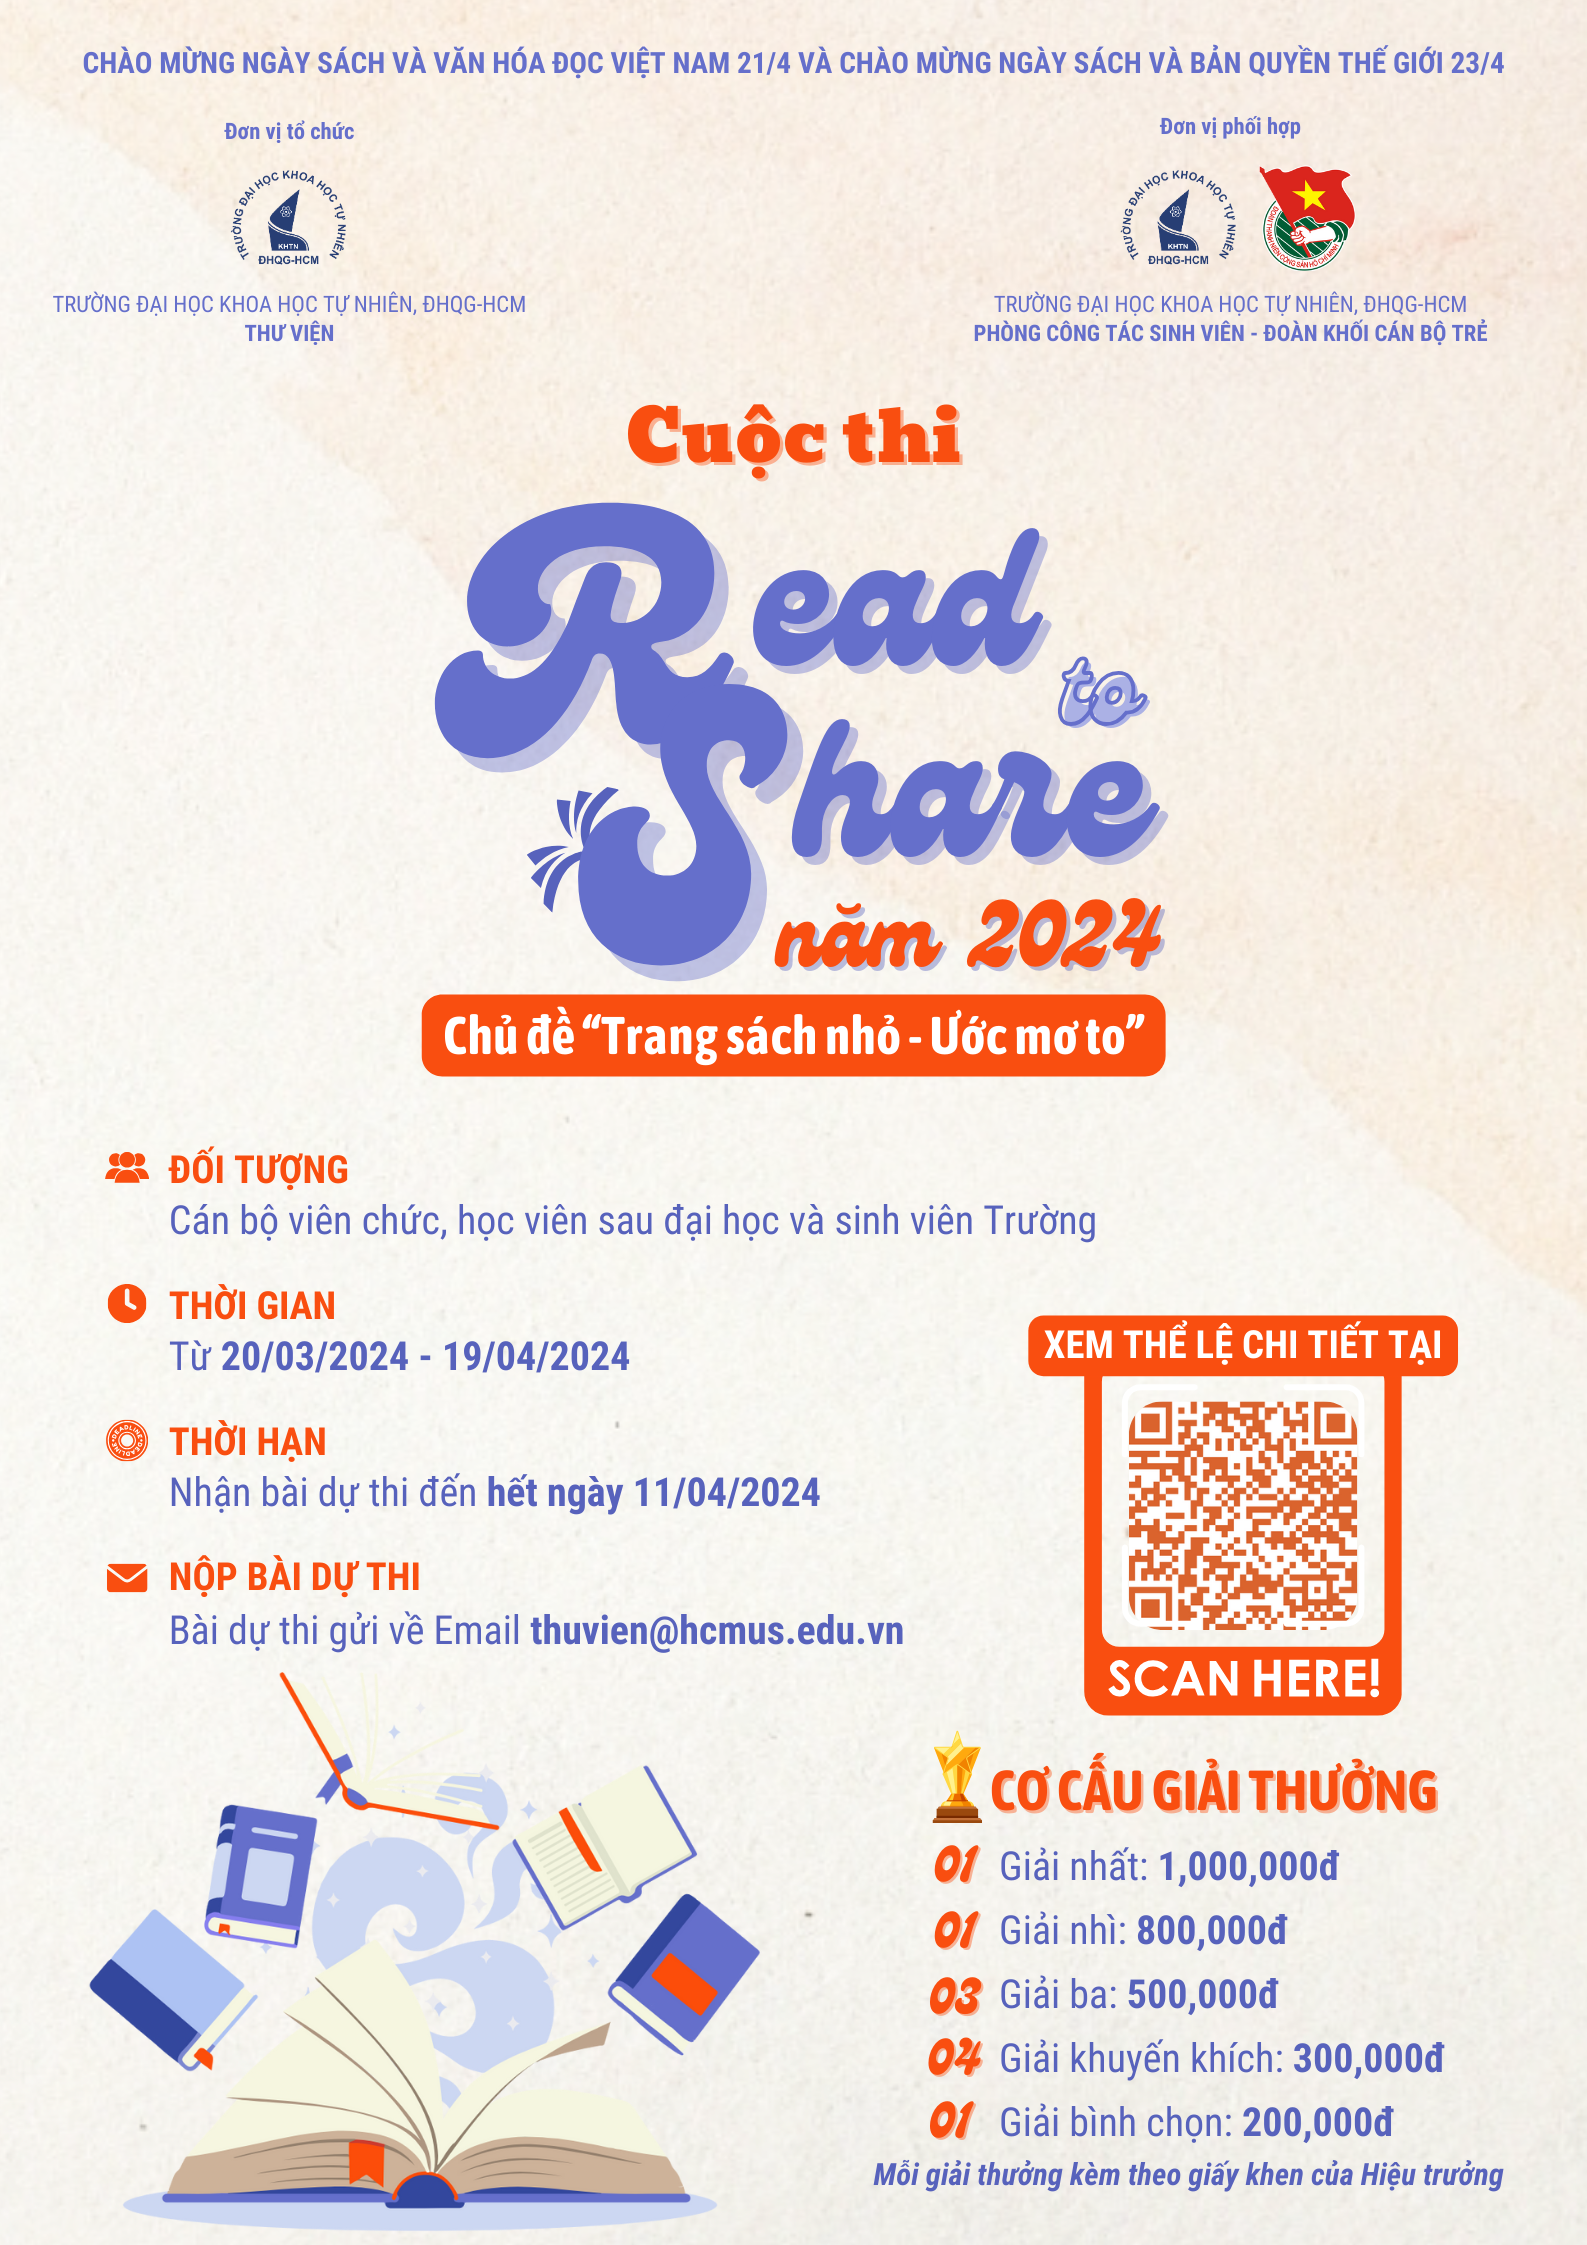 Read to share 2024